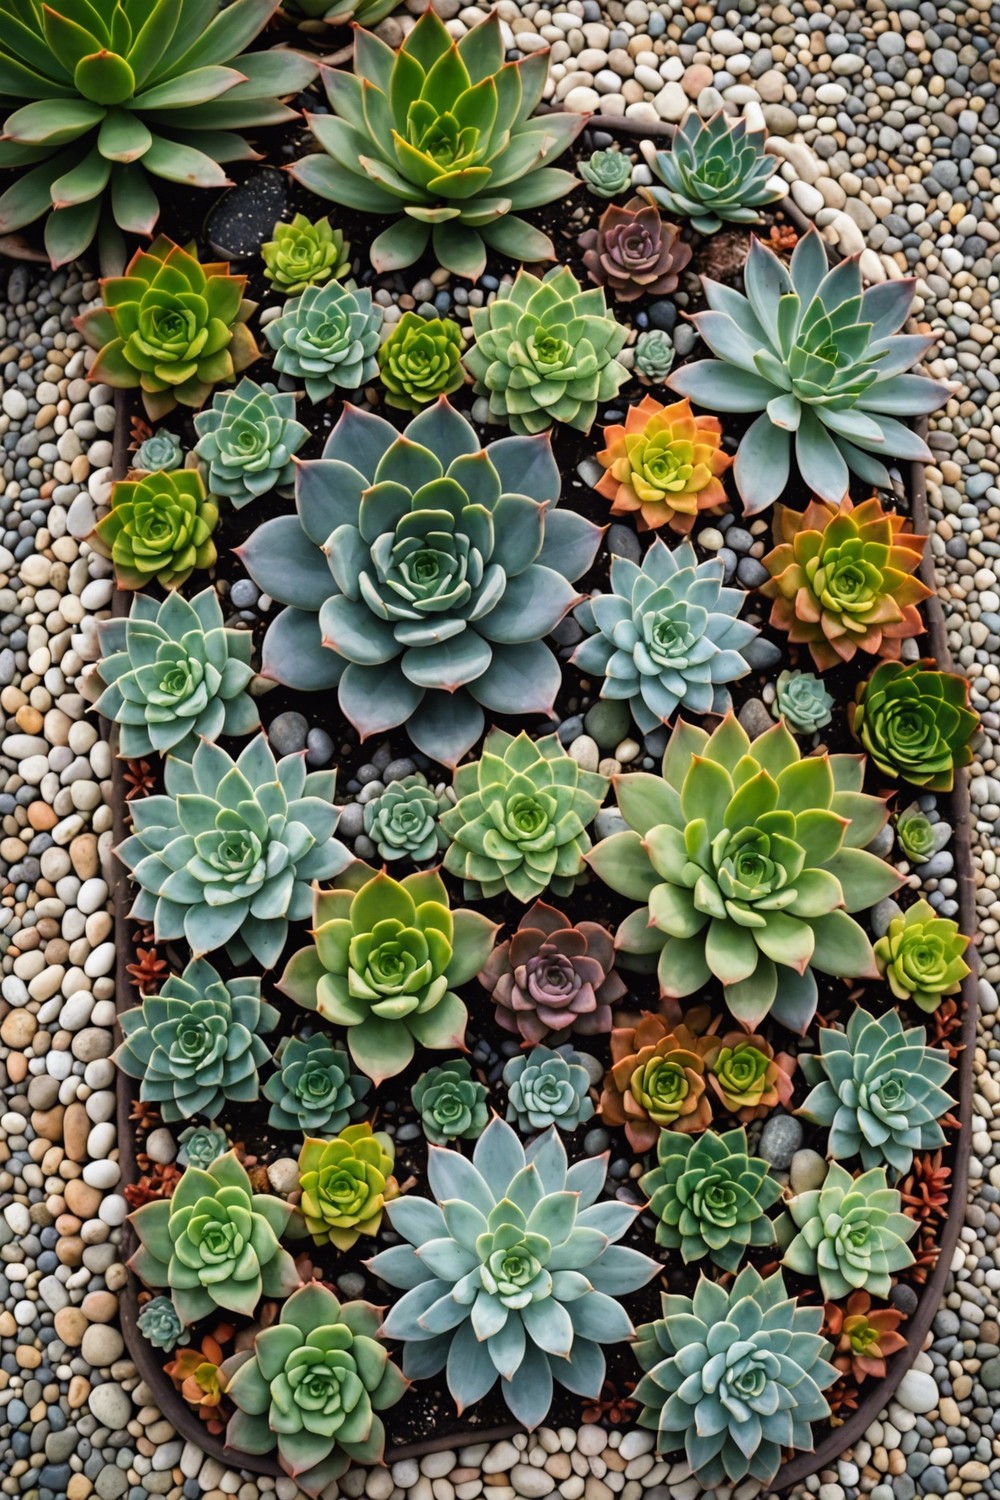 Succulent Mosaics for a Vibrant, Whimsical Look